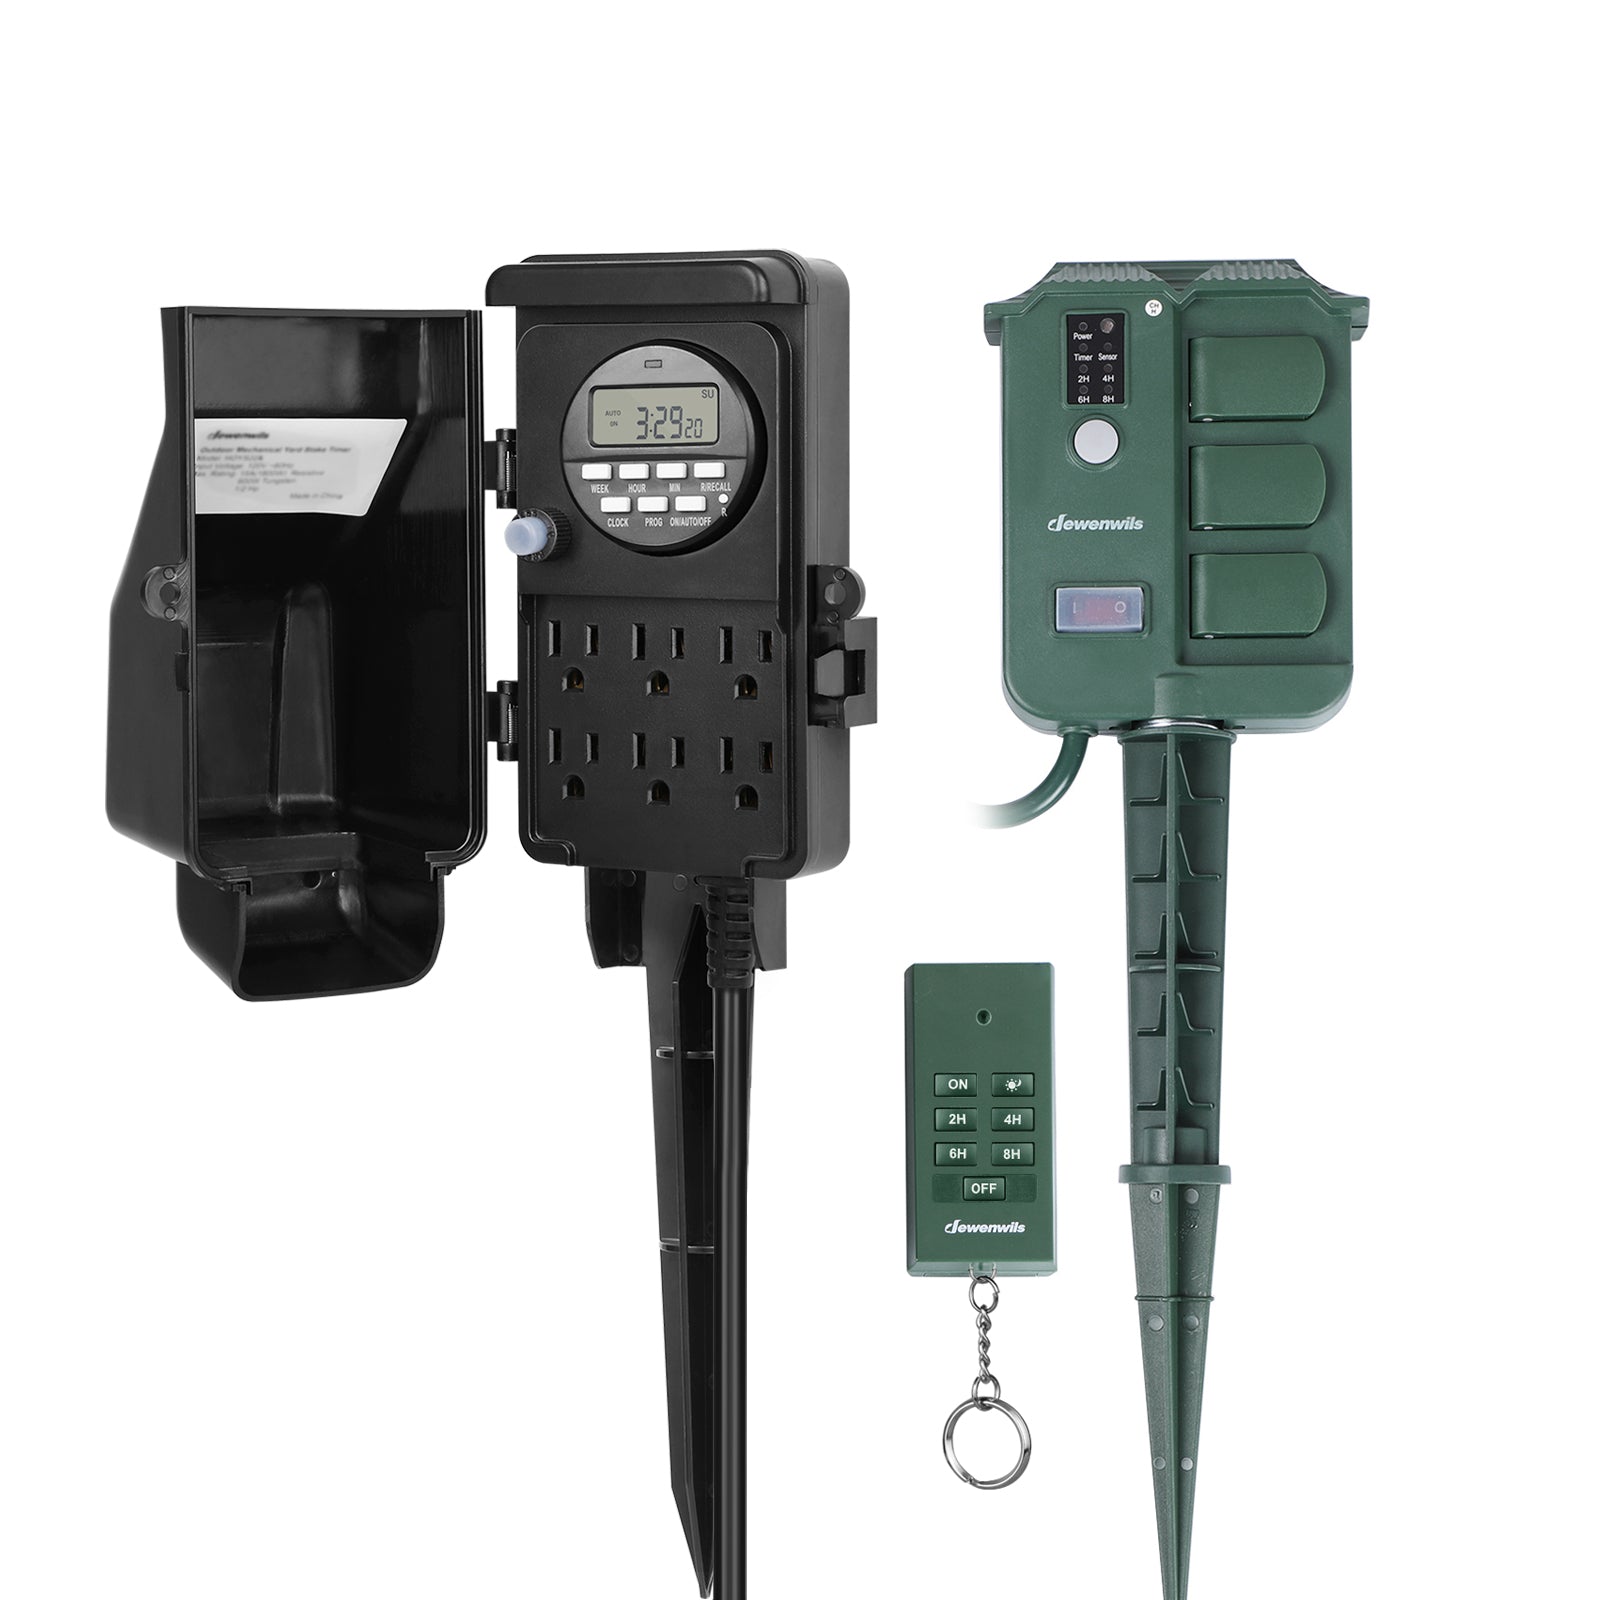 Fosmon Outdoor Power Stake Timer with Photocell, Power Strip Timer